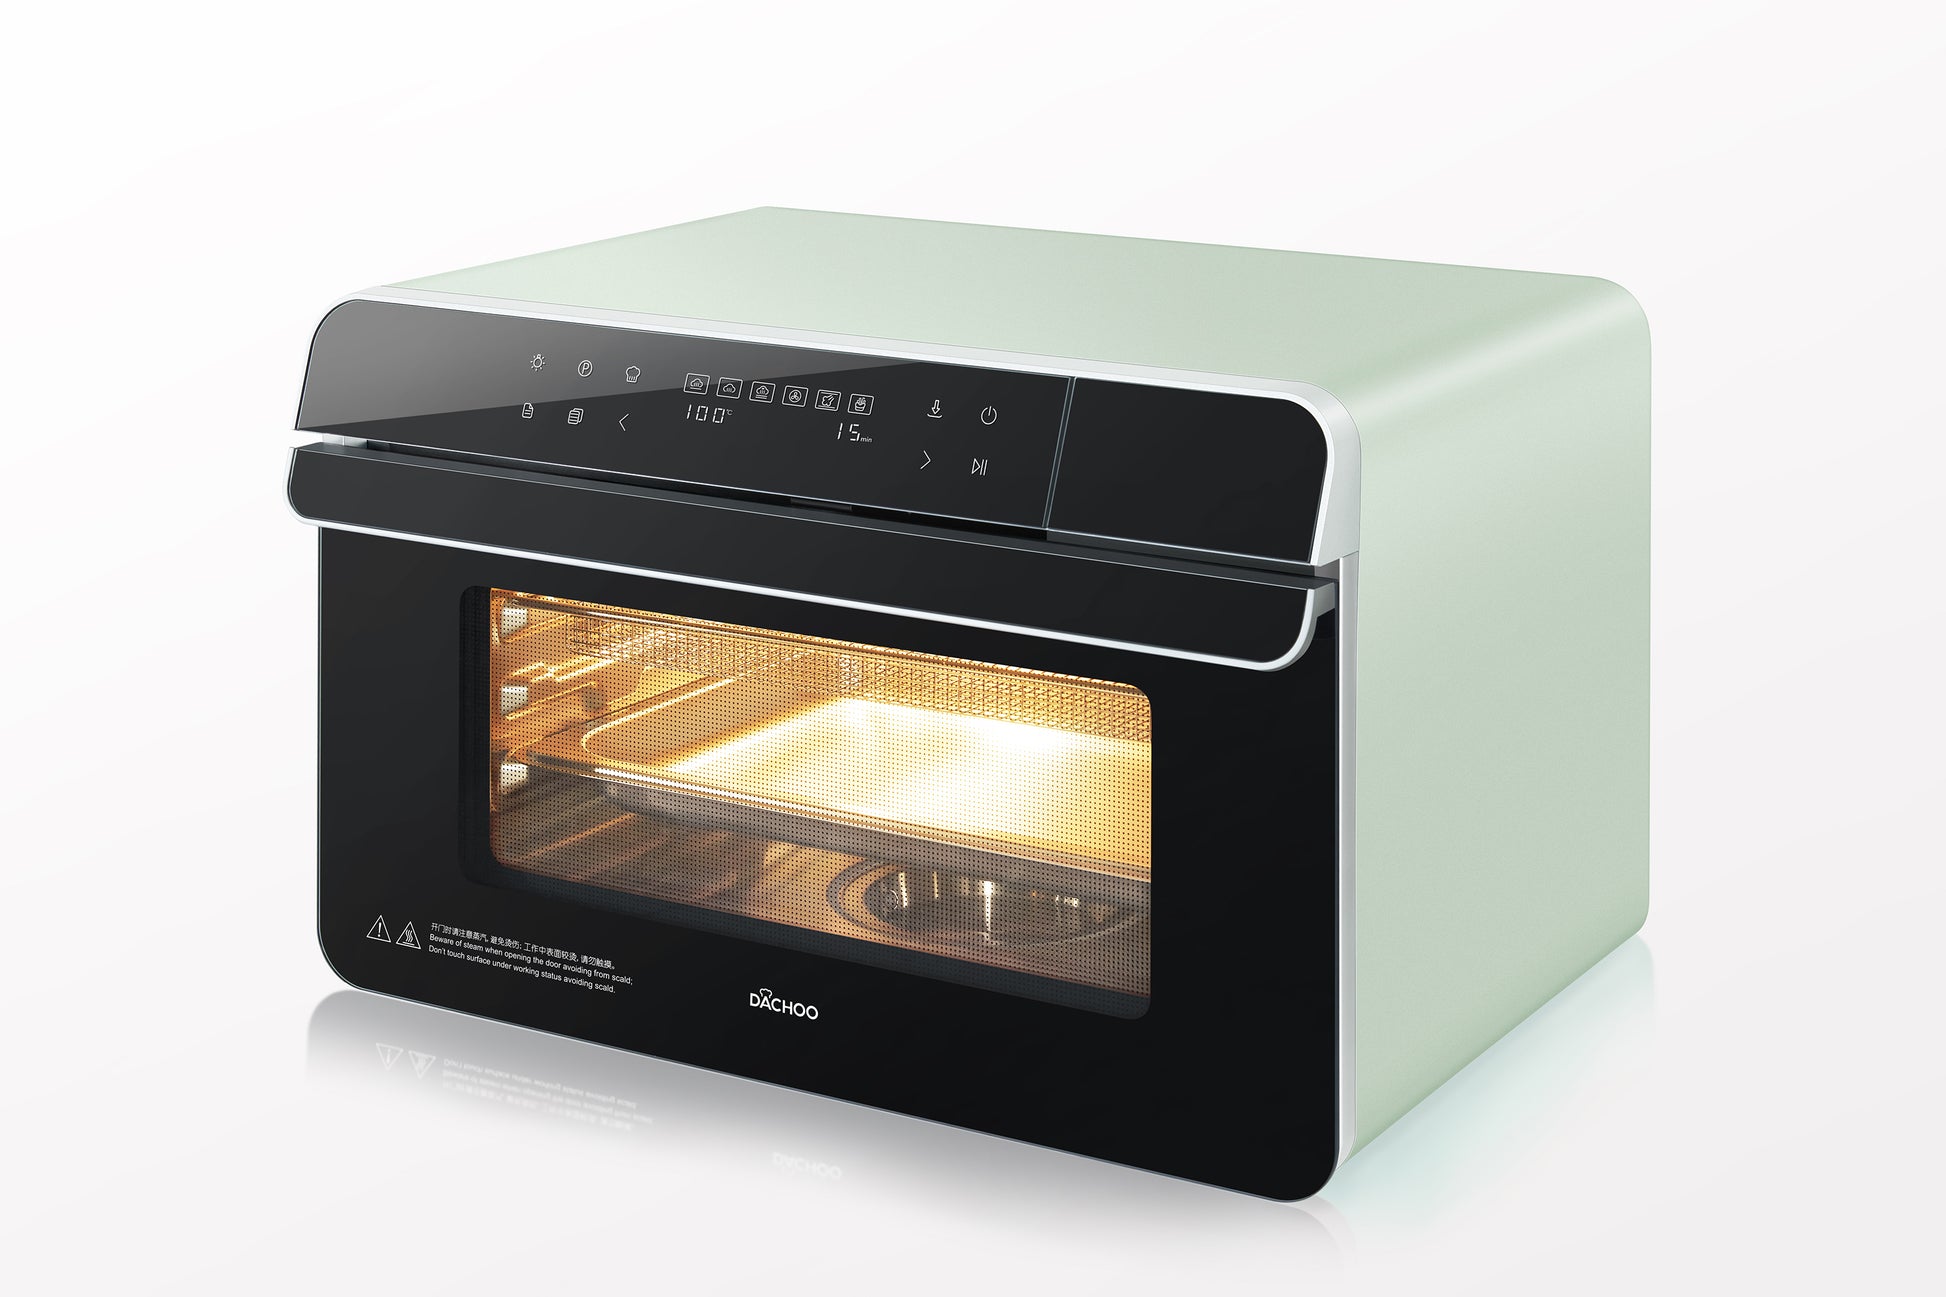 ROBAM  R-Box Green Convection Toaster Oven with Rotisserie (1800-Watt) CT763G